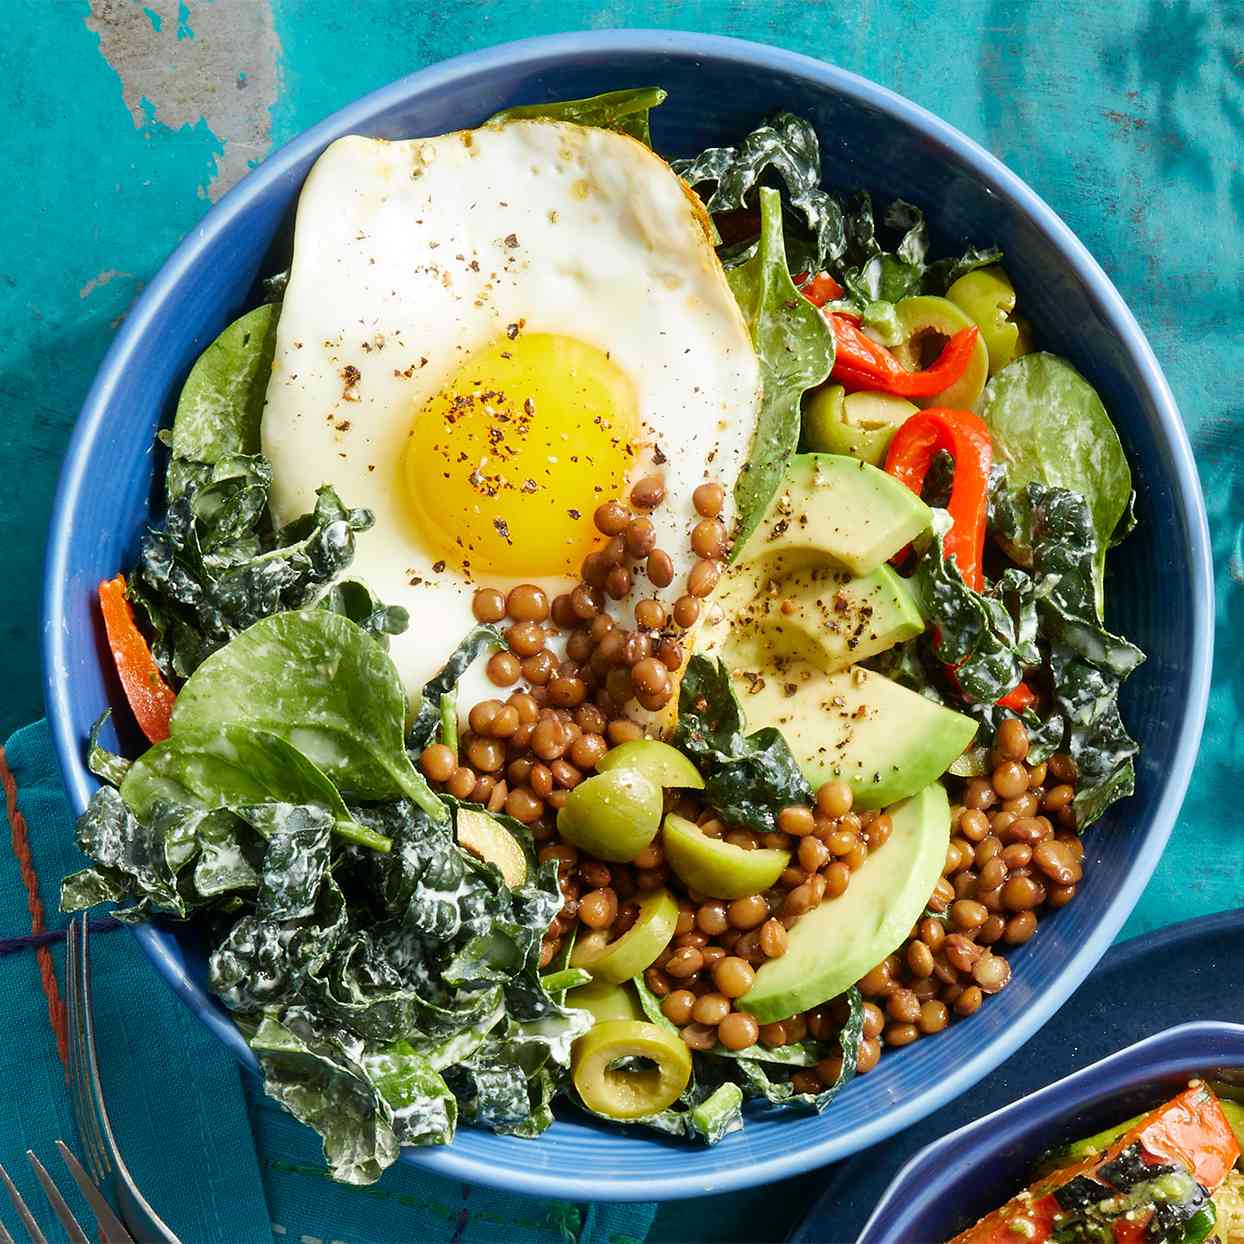 Lentil Bowls with Fried Eggs & Greens